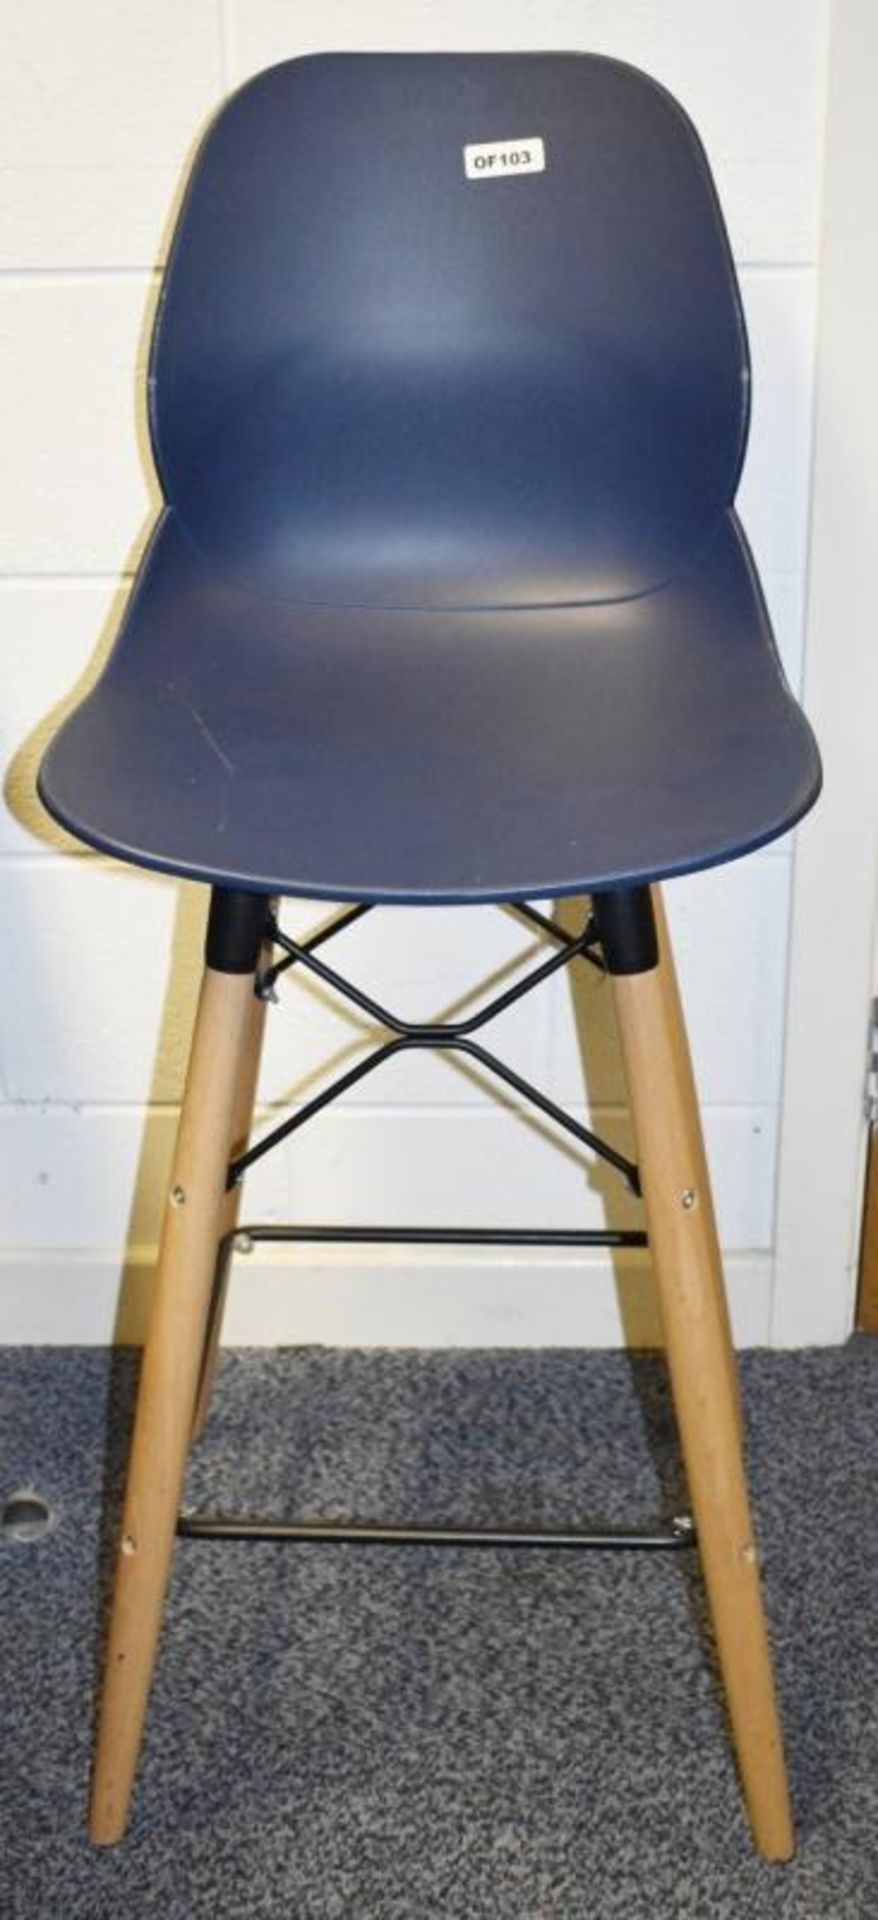 3 x GRESHAM Eames-Style Bar Stools - 3 Colours - Used, Please See Condition Report - CL437 - Locatio - Image 5 of 7